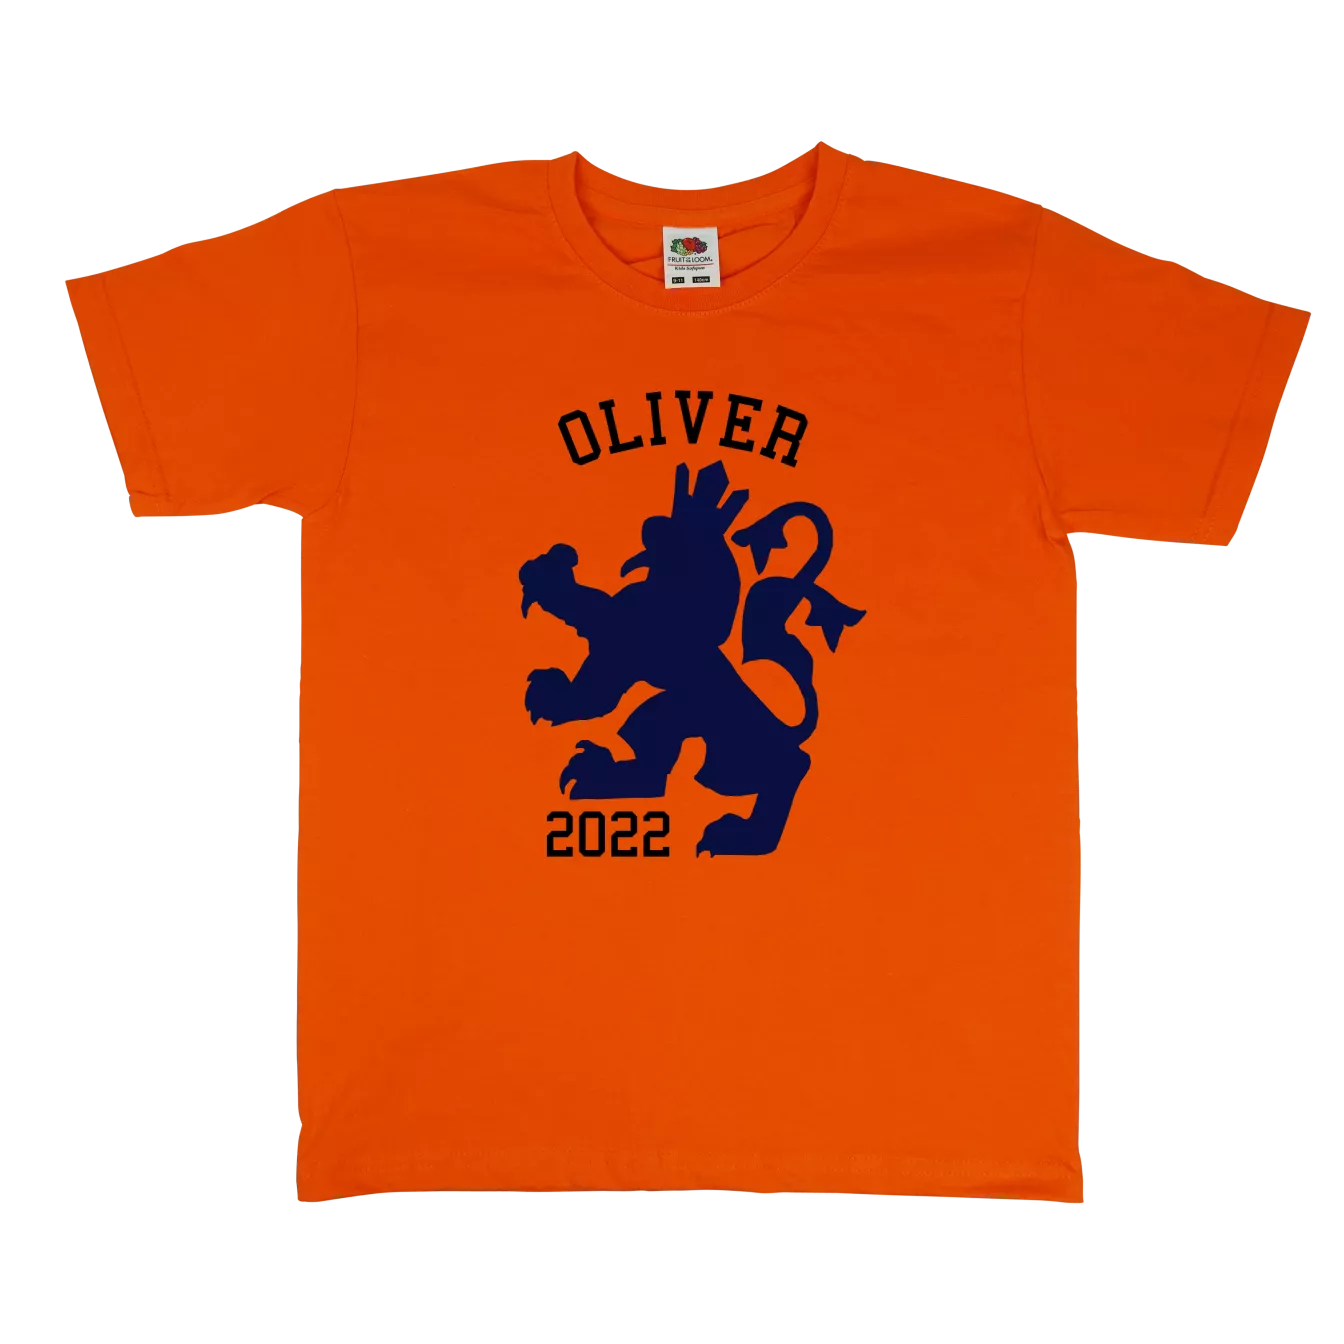 | name it on (kids) Orange with Bulbby shirt text or printed